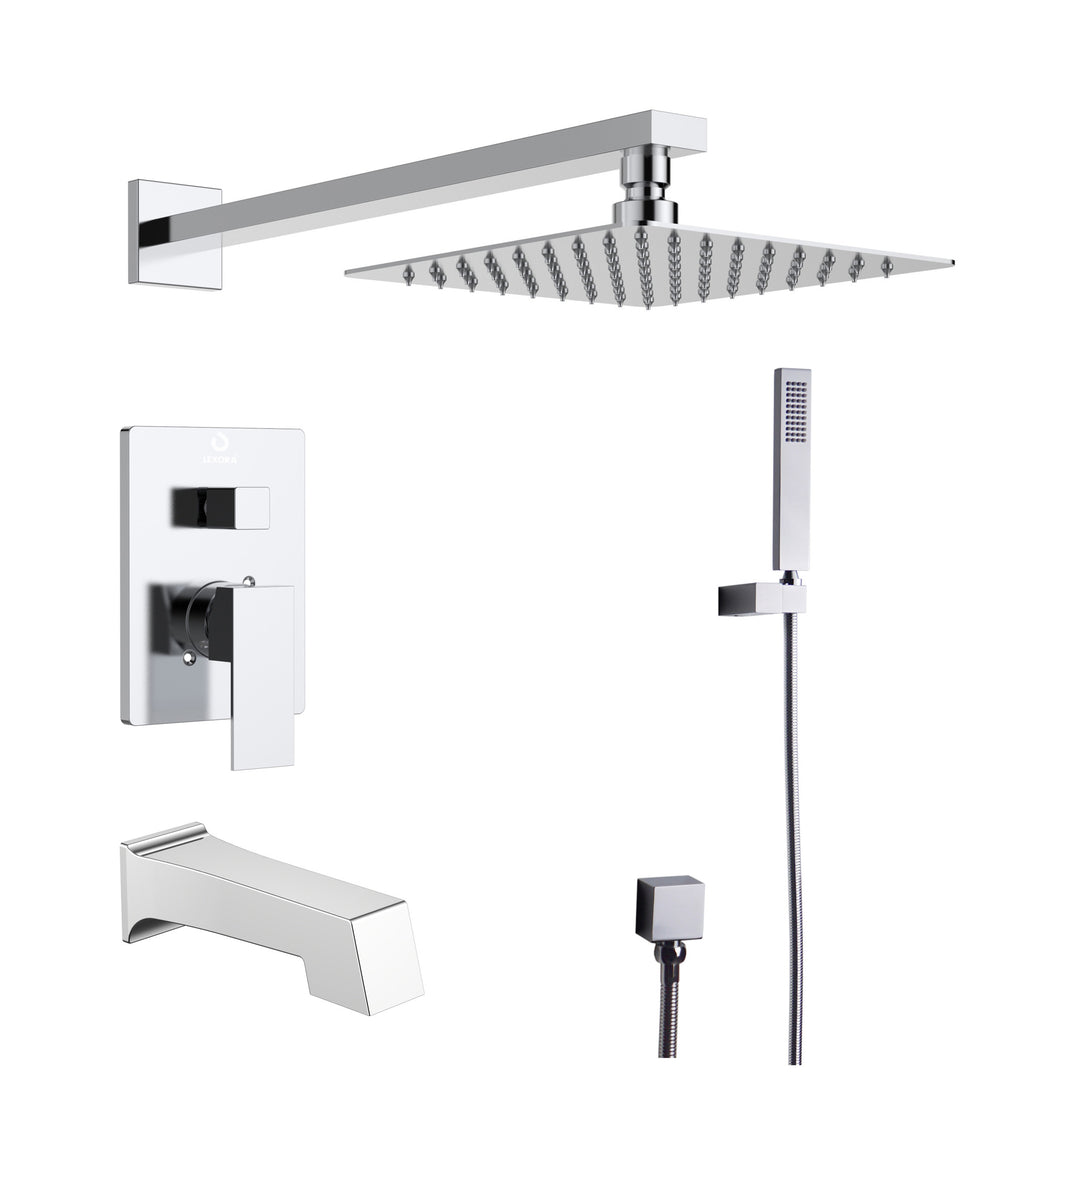 Monte Celo Stainless Steel Square Shower Set, Chrome Finish  LSS10011CH